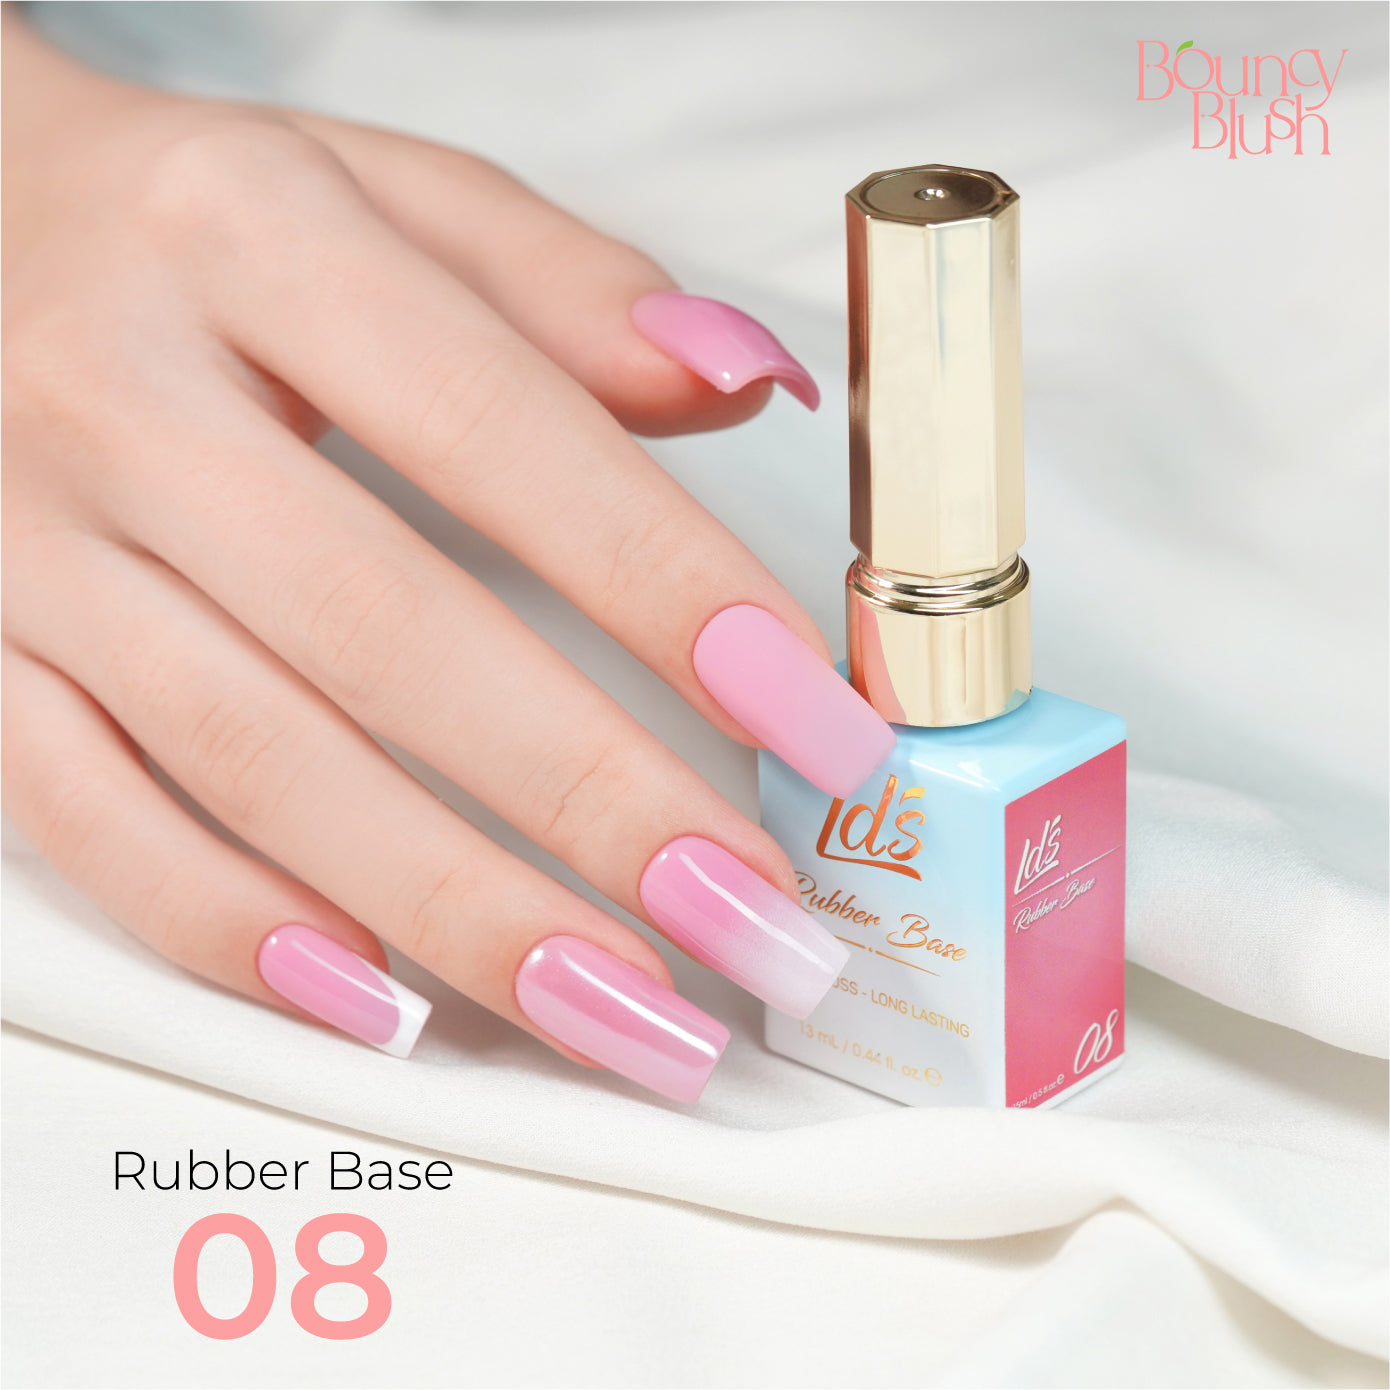 LDS  Bouncy Blush Rubber Base Gel Collection